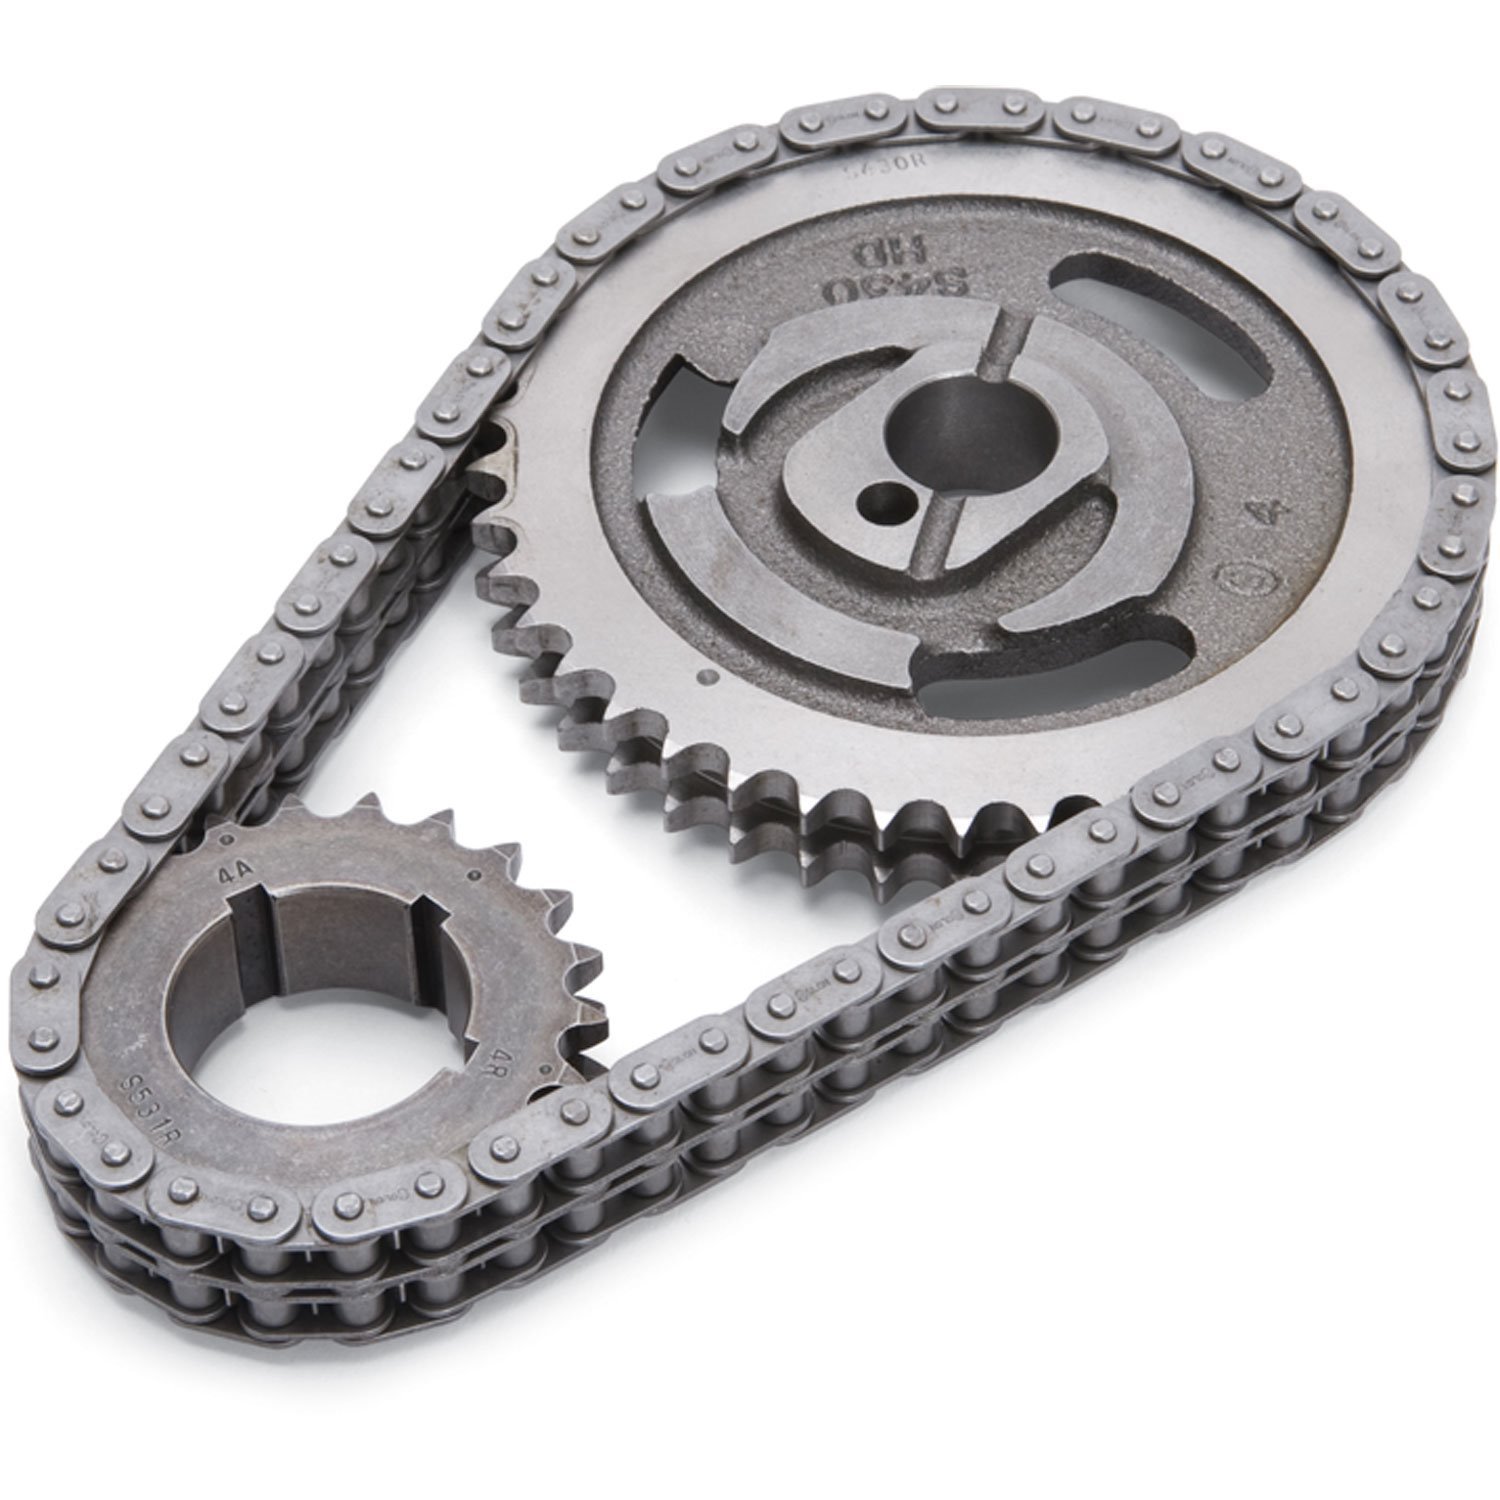 Performer-Link Timing Chain Set for 1984-1995 Small Block